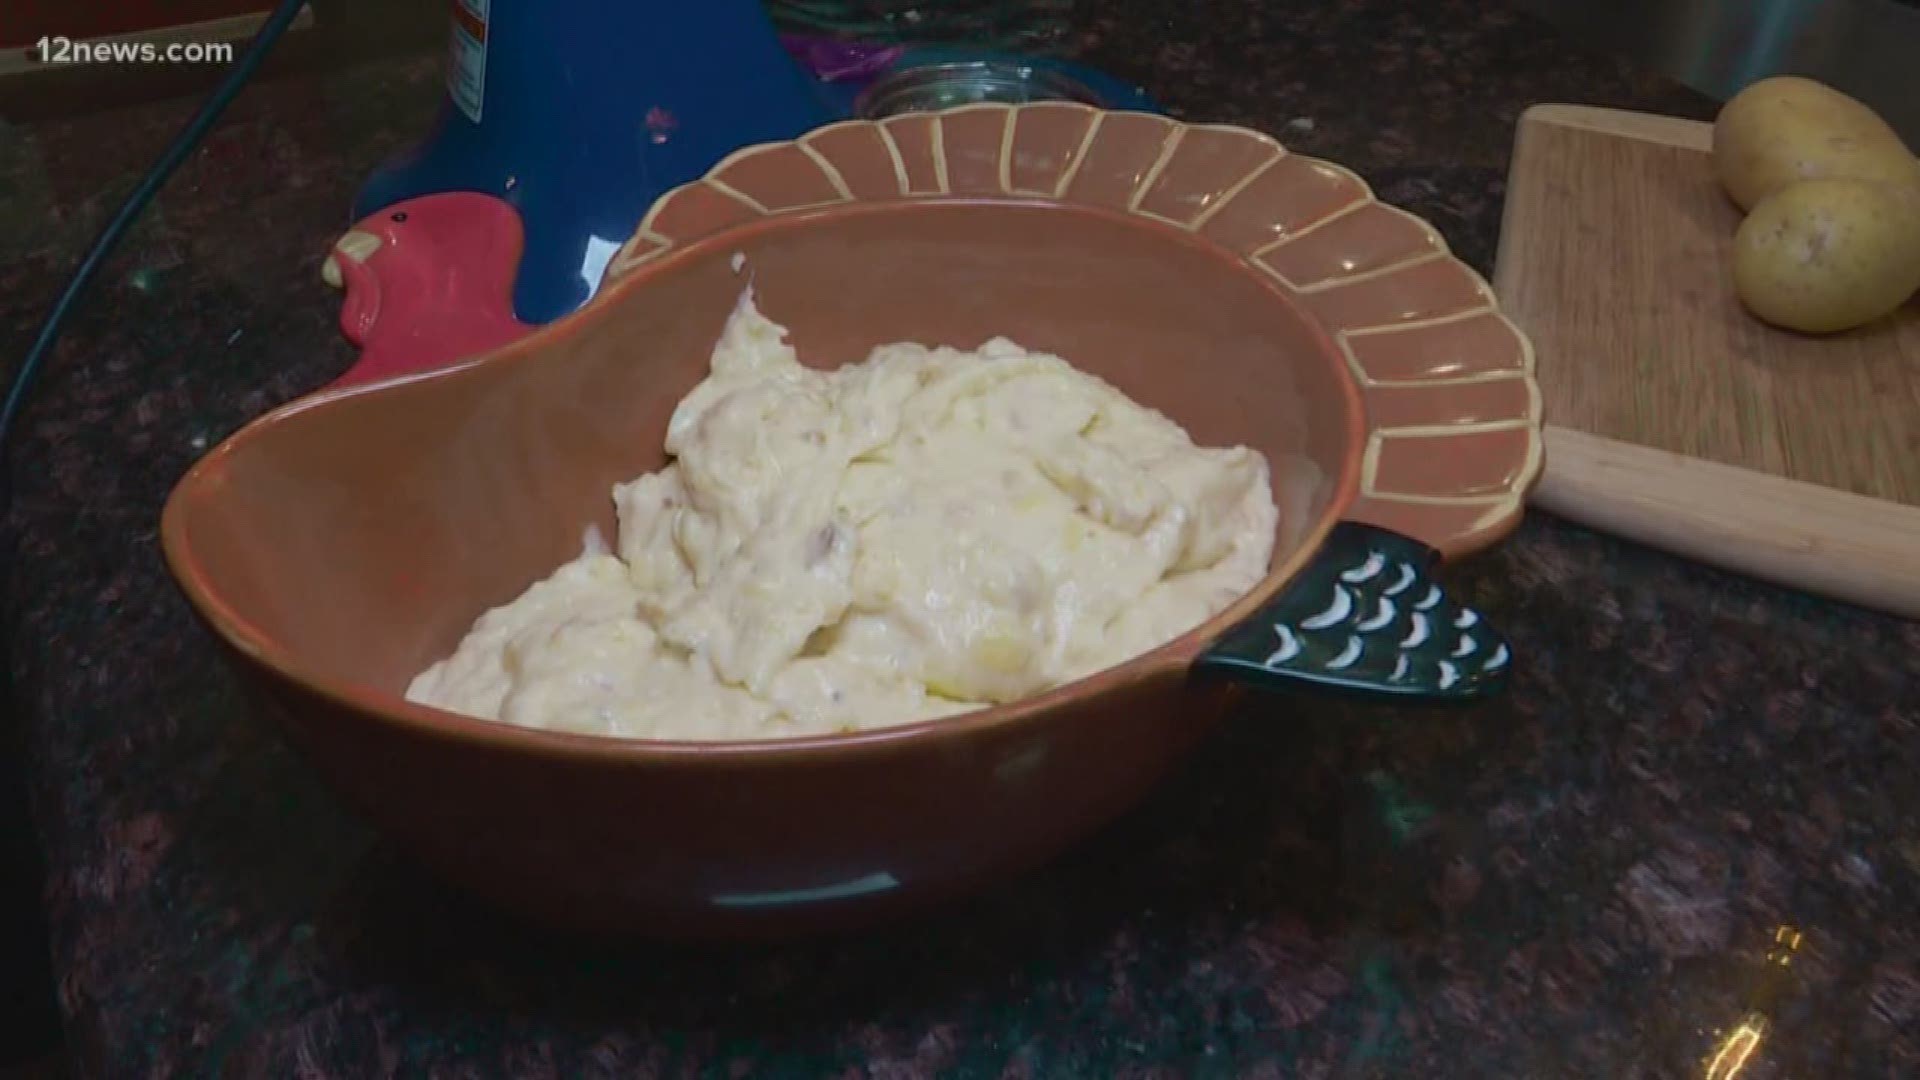 Love potatoes? Team 12's Will Pitts has the perfect side dish for you.